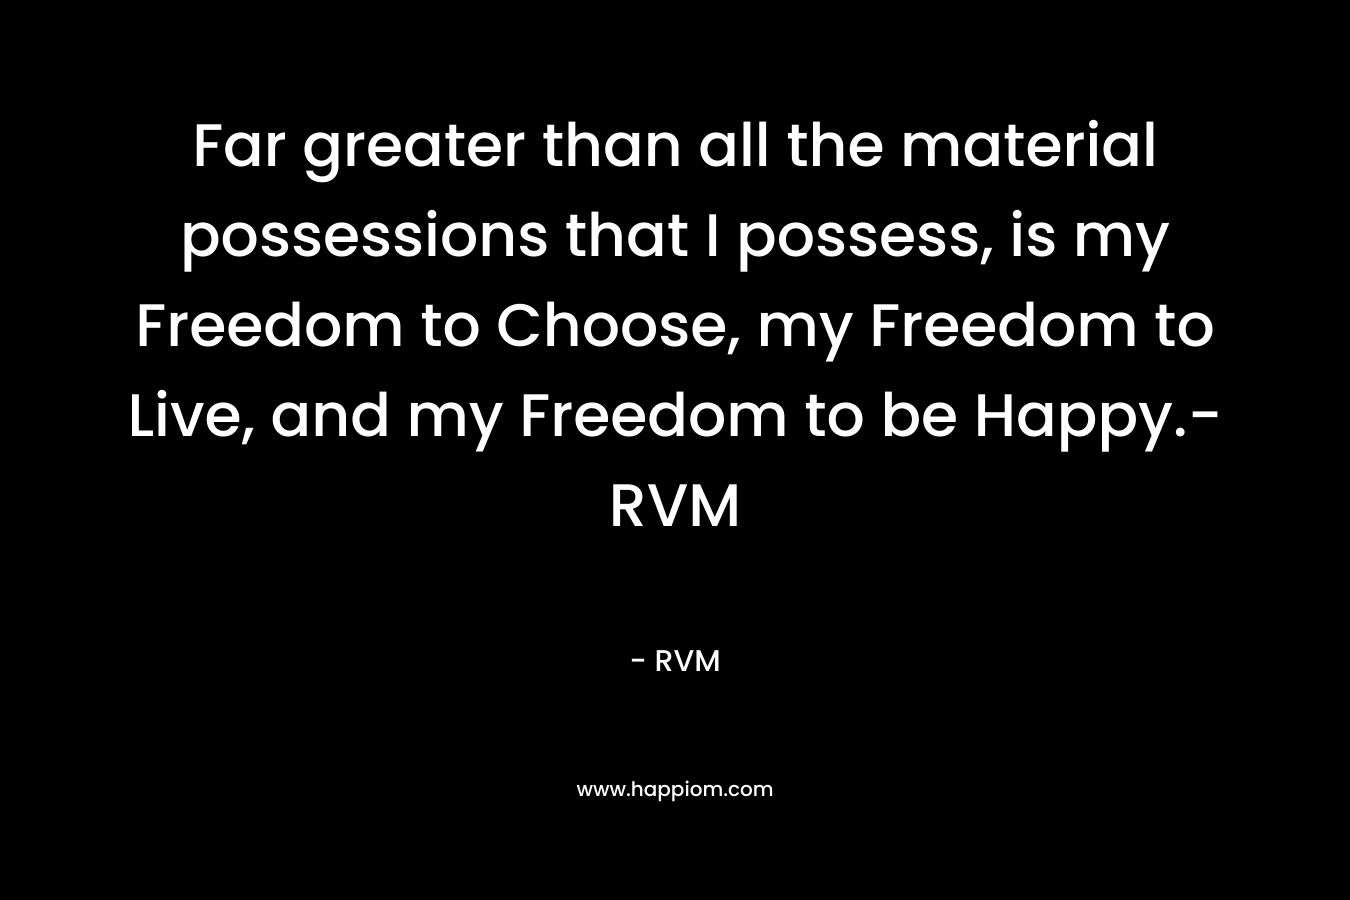 Far greater than all the material possessions that I possess, is my Freedom to Choose, my Freedom to Live, and my Freedom to be Happy.- RVM